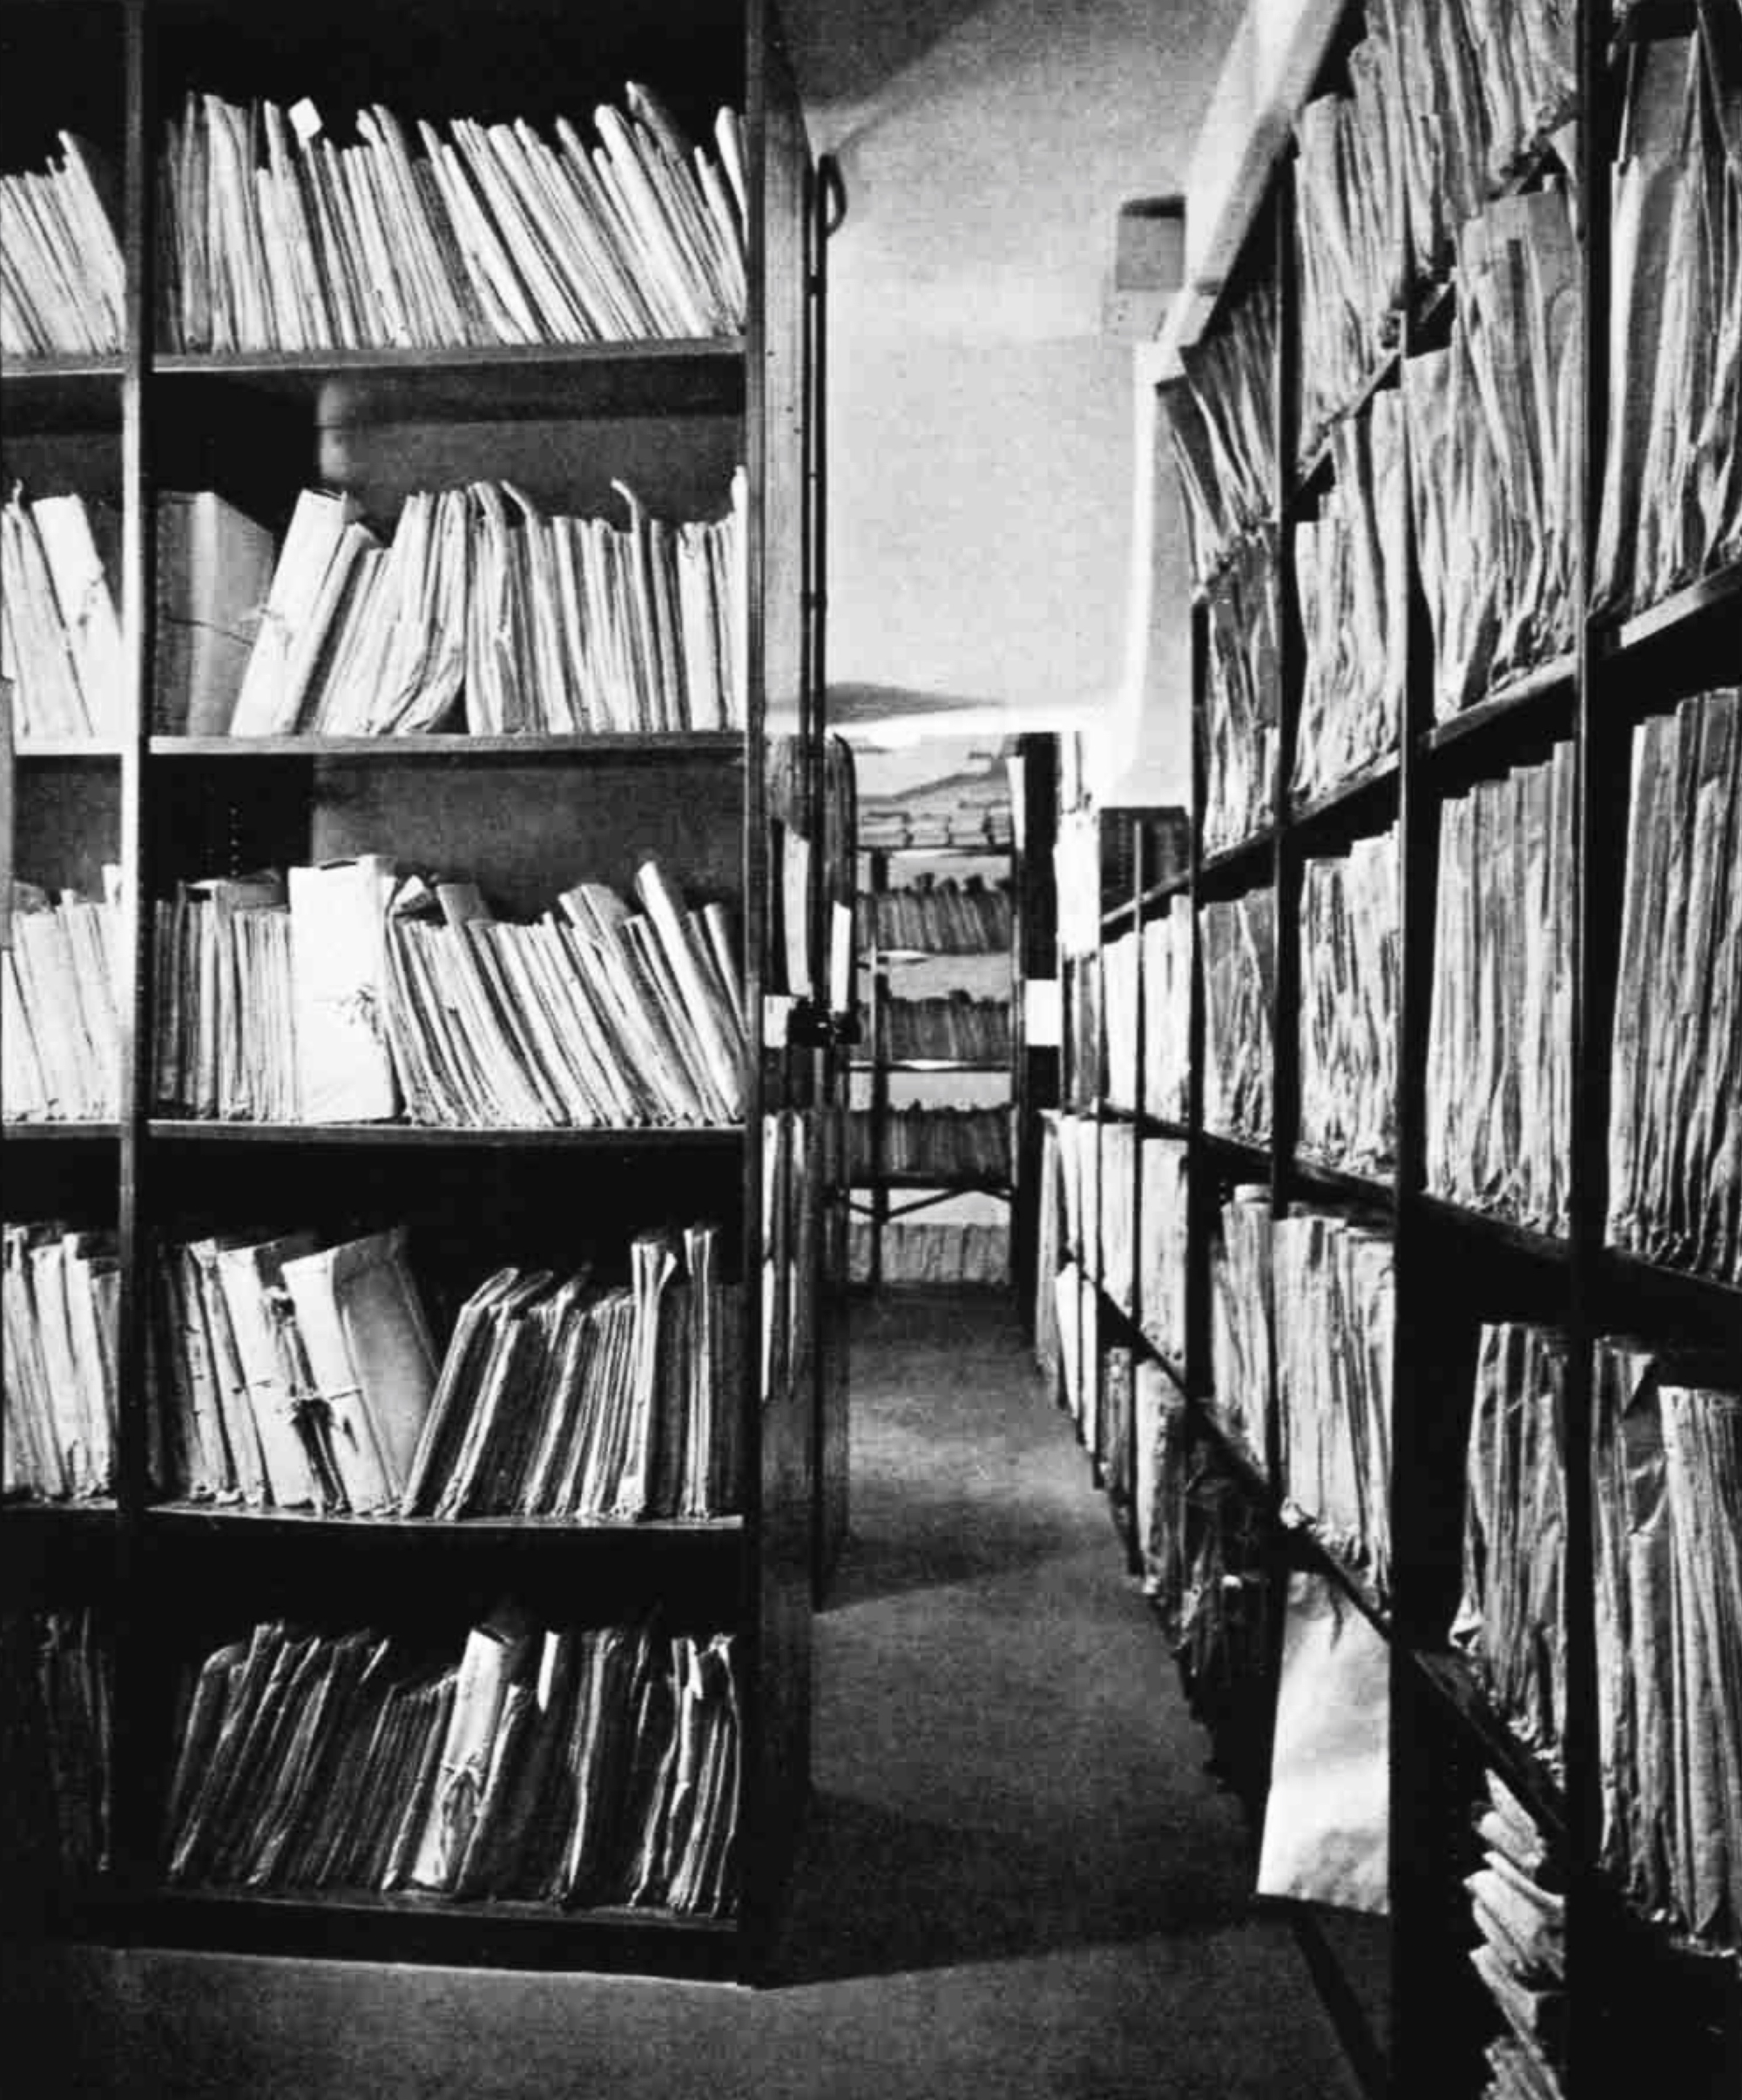 Shelves filled with gramophone records and sheet music